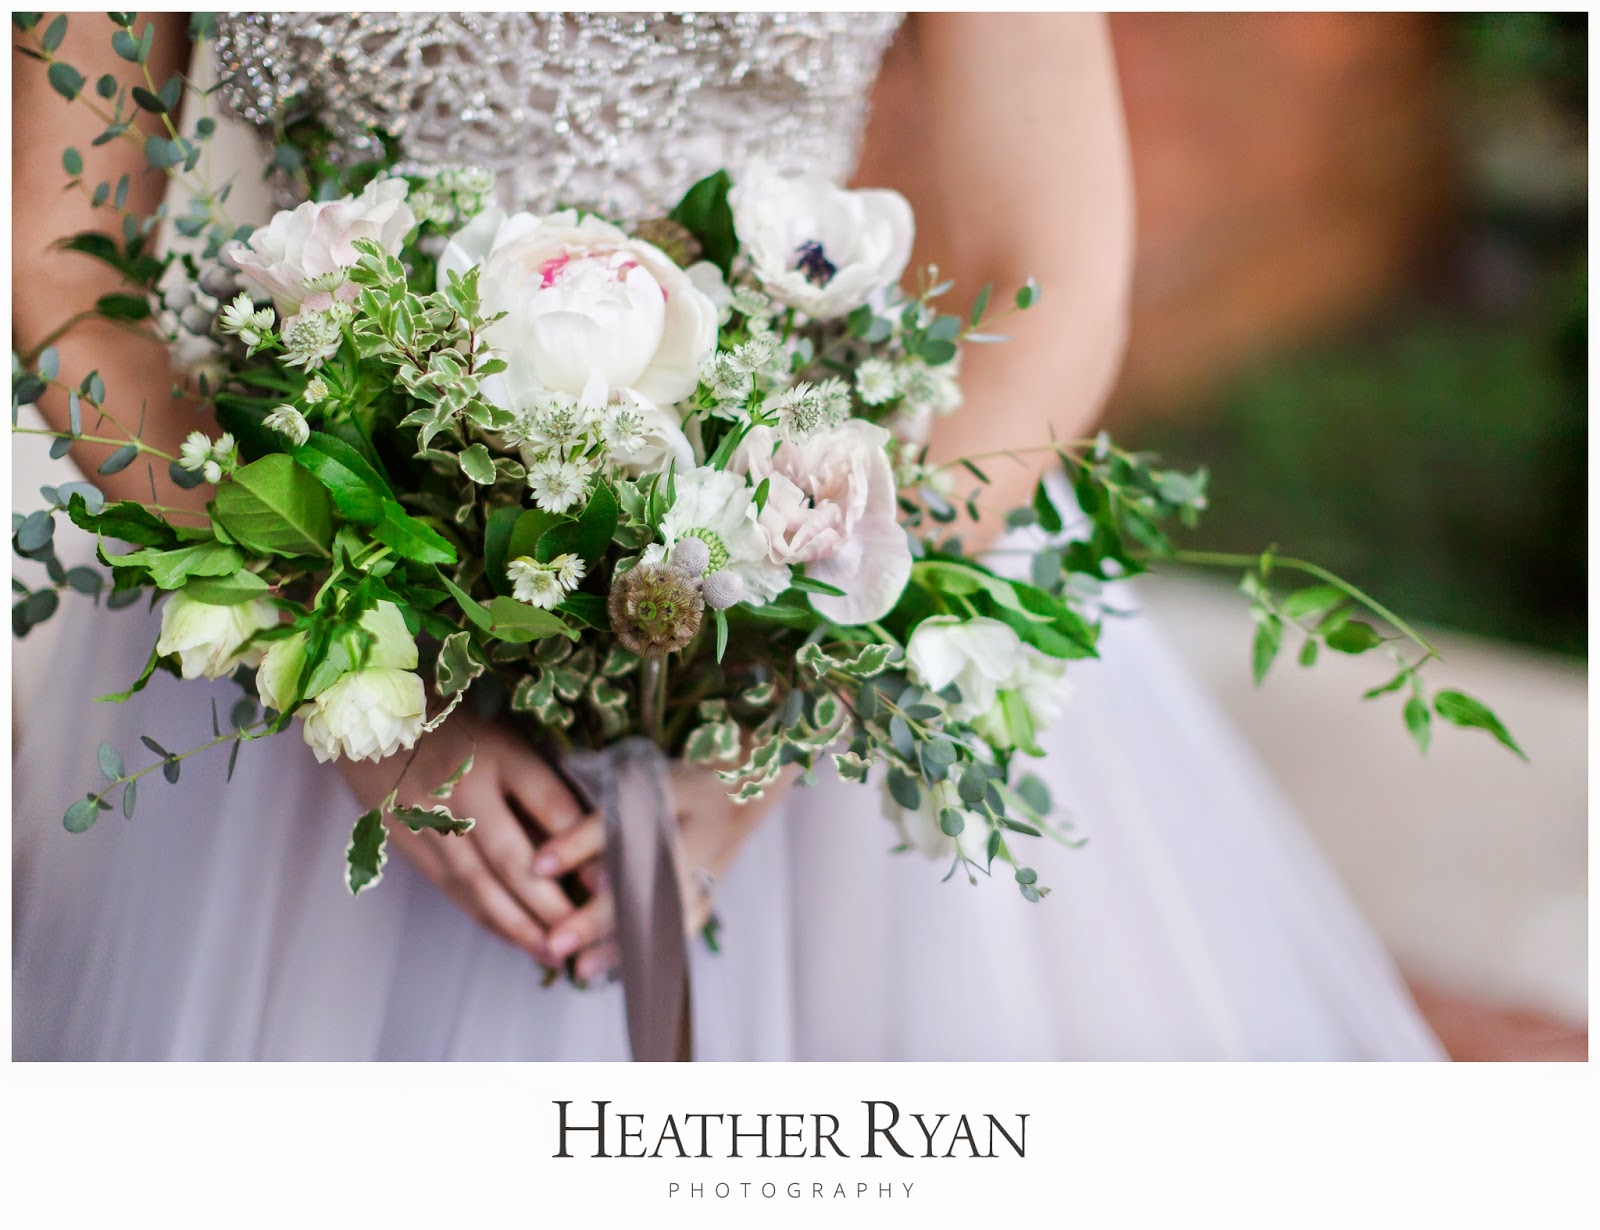 Organic Wedding Inspiration from the Bayside Bride Workshop | Photos by Heather Ryan Photography